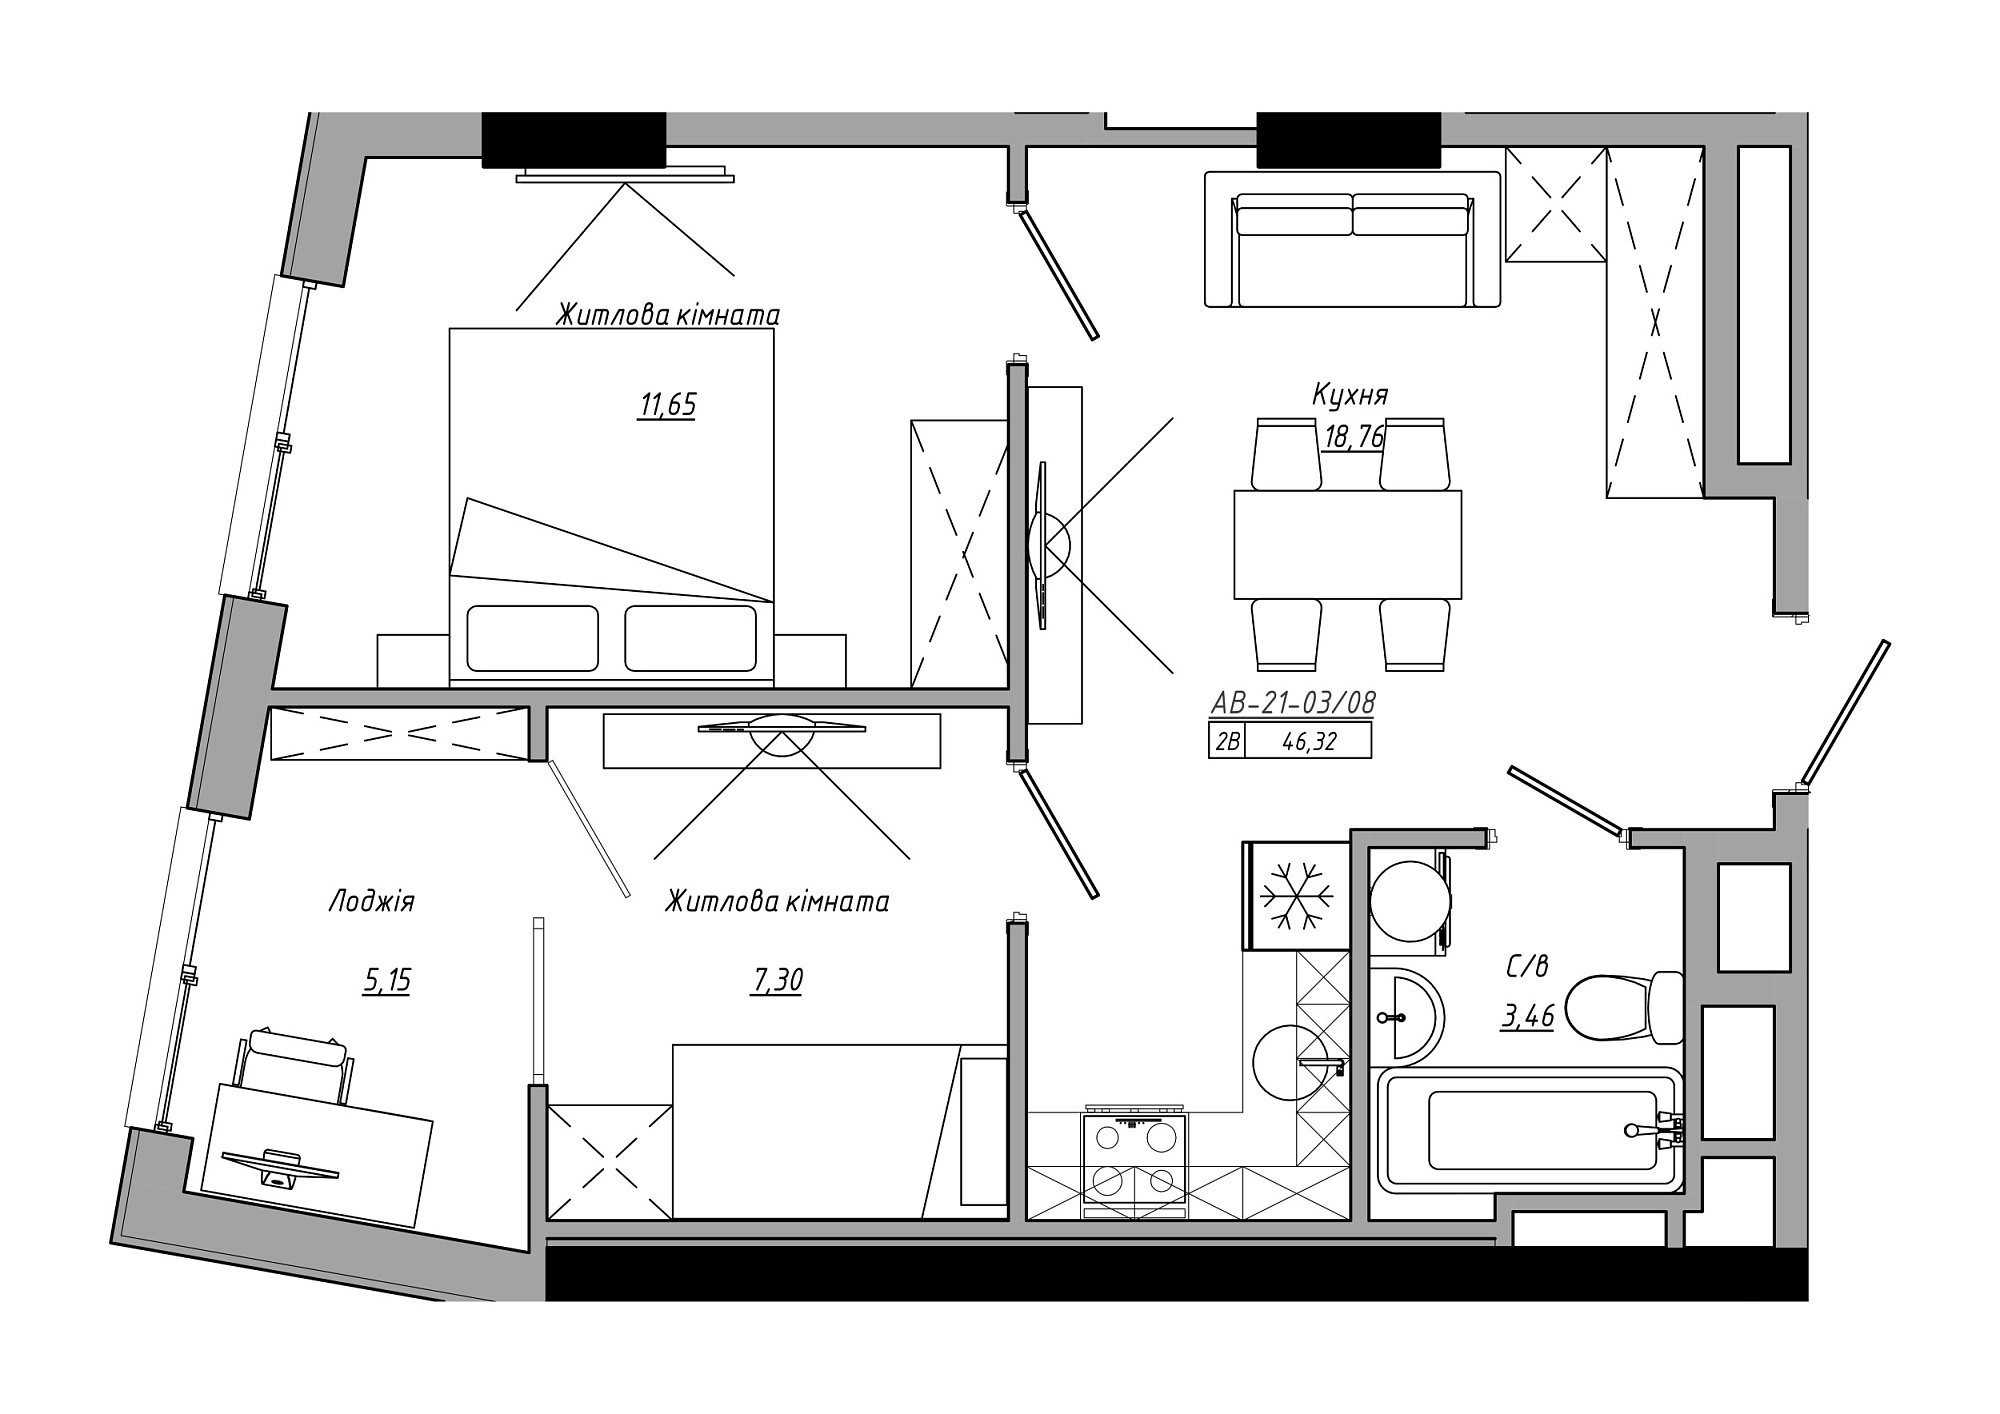 Planning 2-rm flats area 46.32m2, AB-21-03/00008.